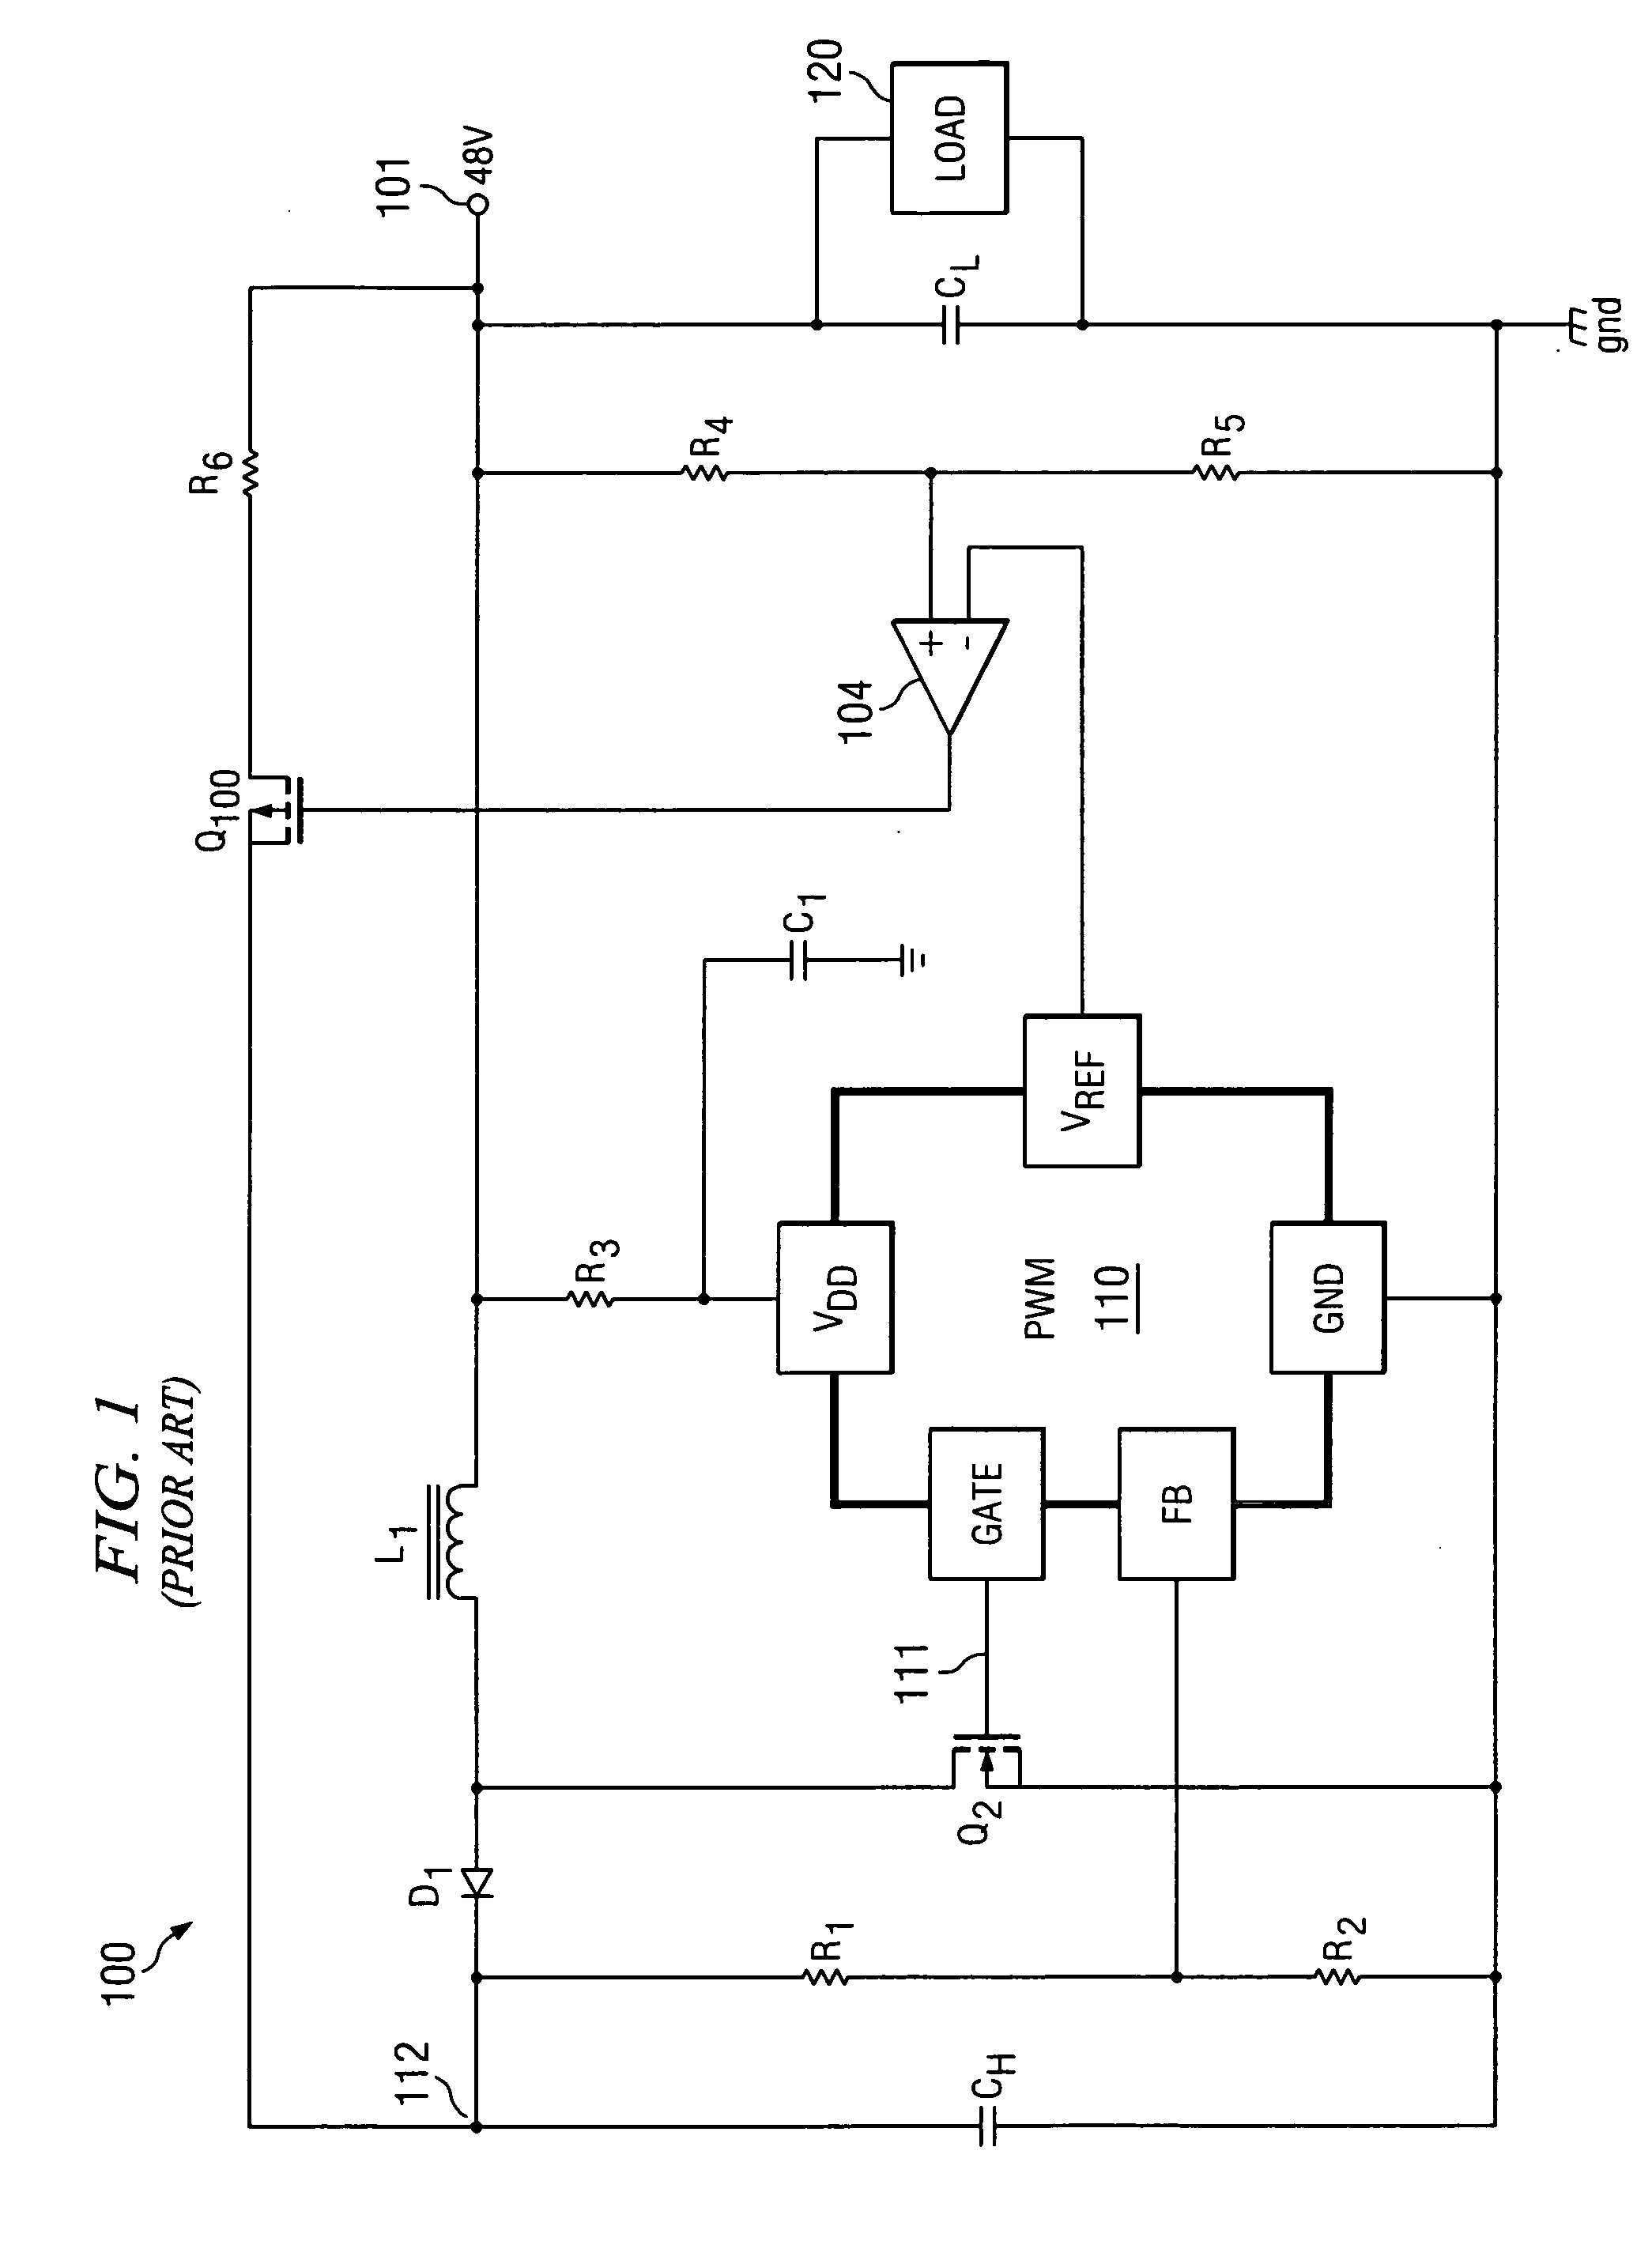 Holdover circuit for a power converter using a bi-directional switching regulator